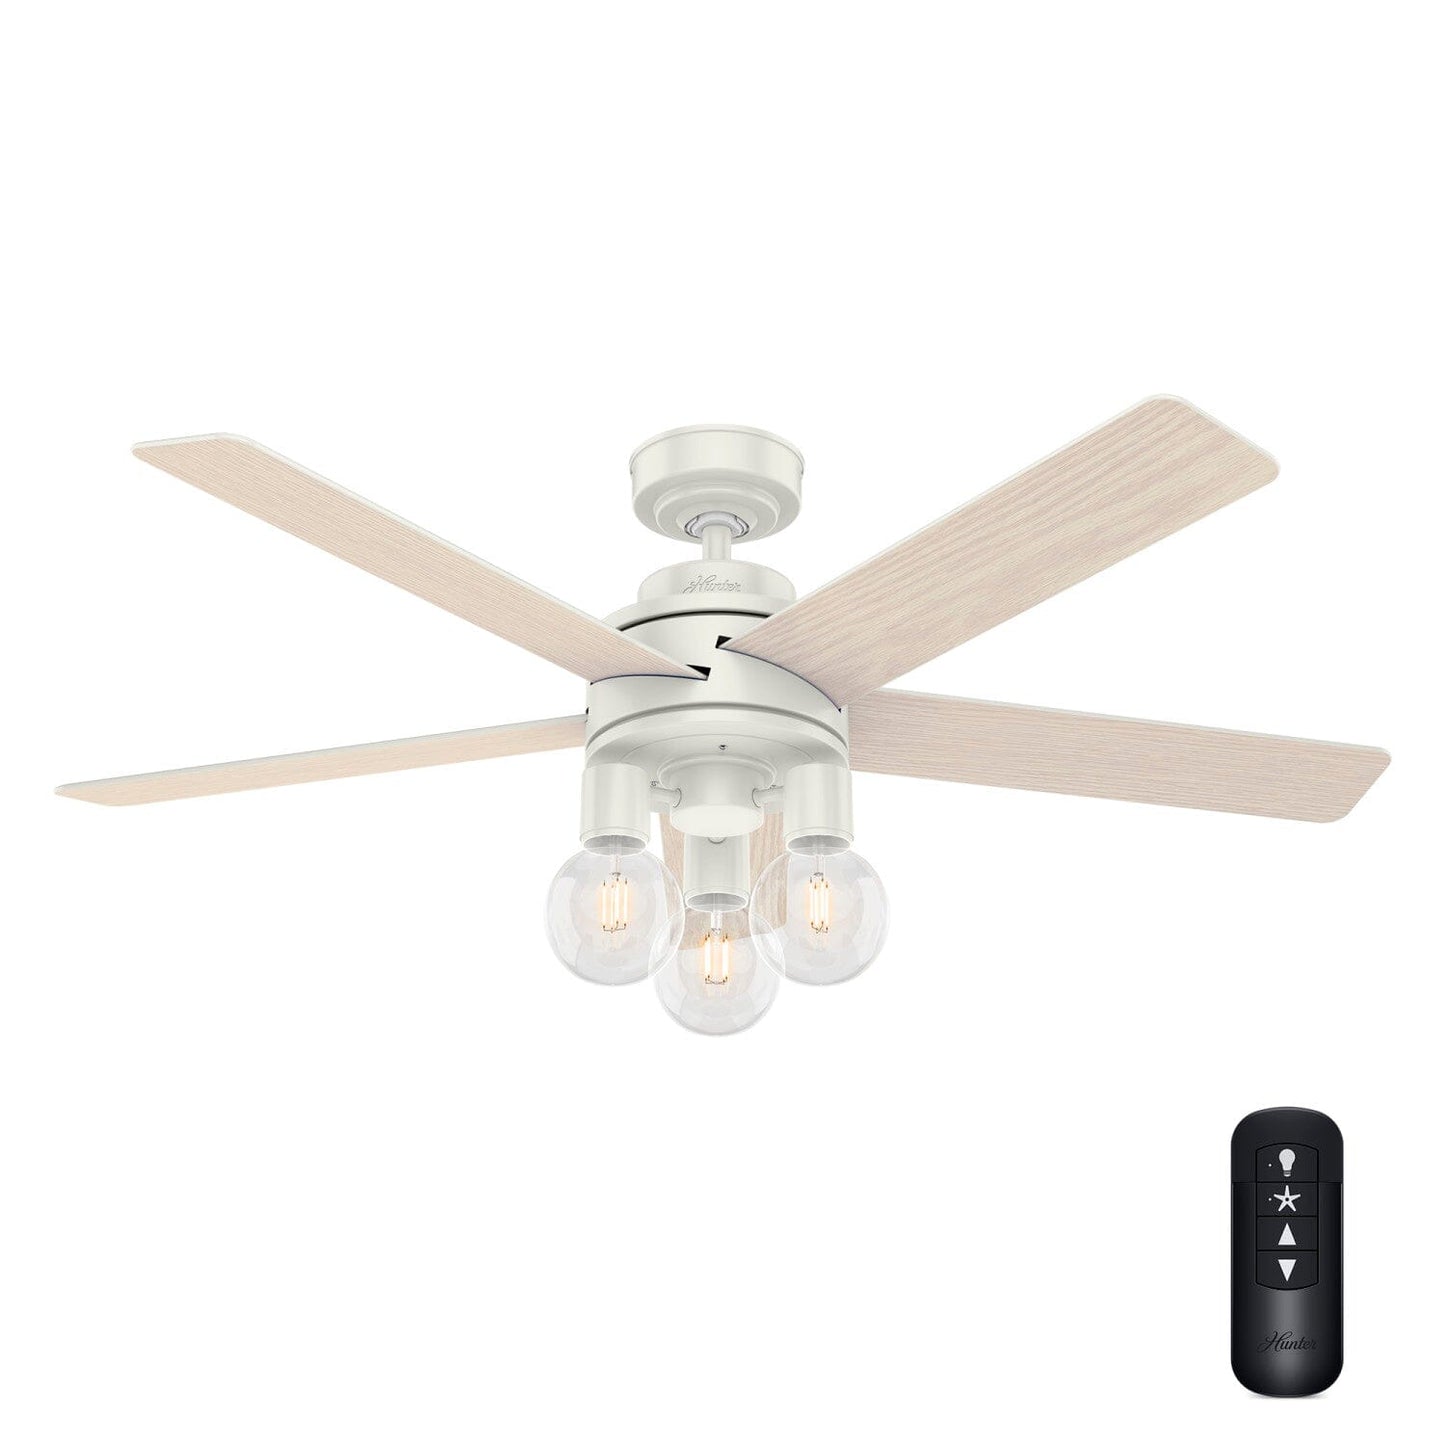 Hardwick with LED Light and Remote Control 52 inch Ceiling Fans Hunter Fresh White - White Oak 